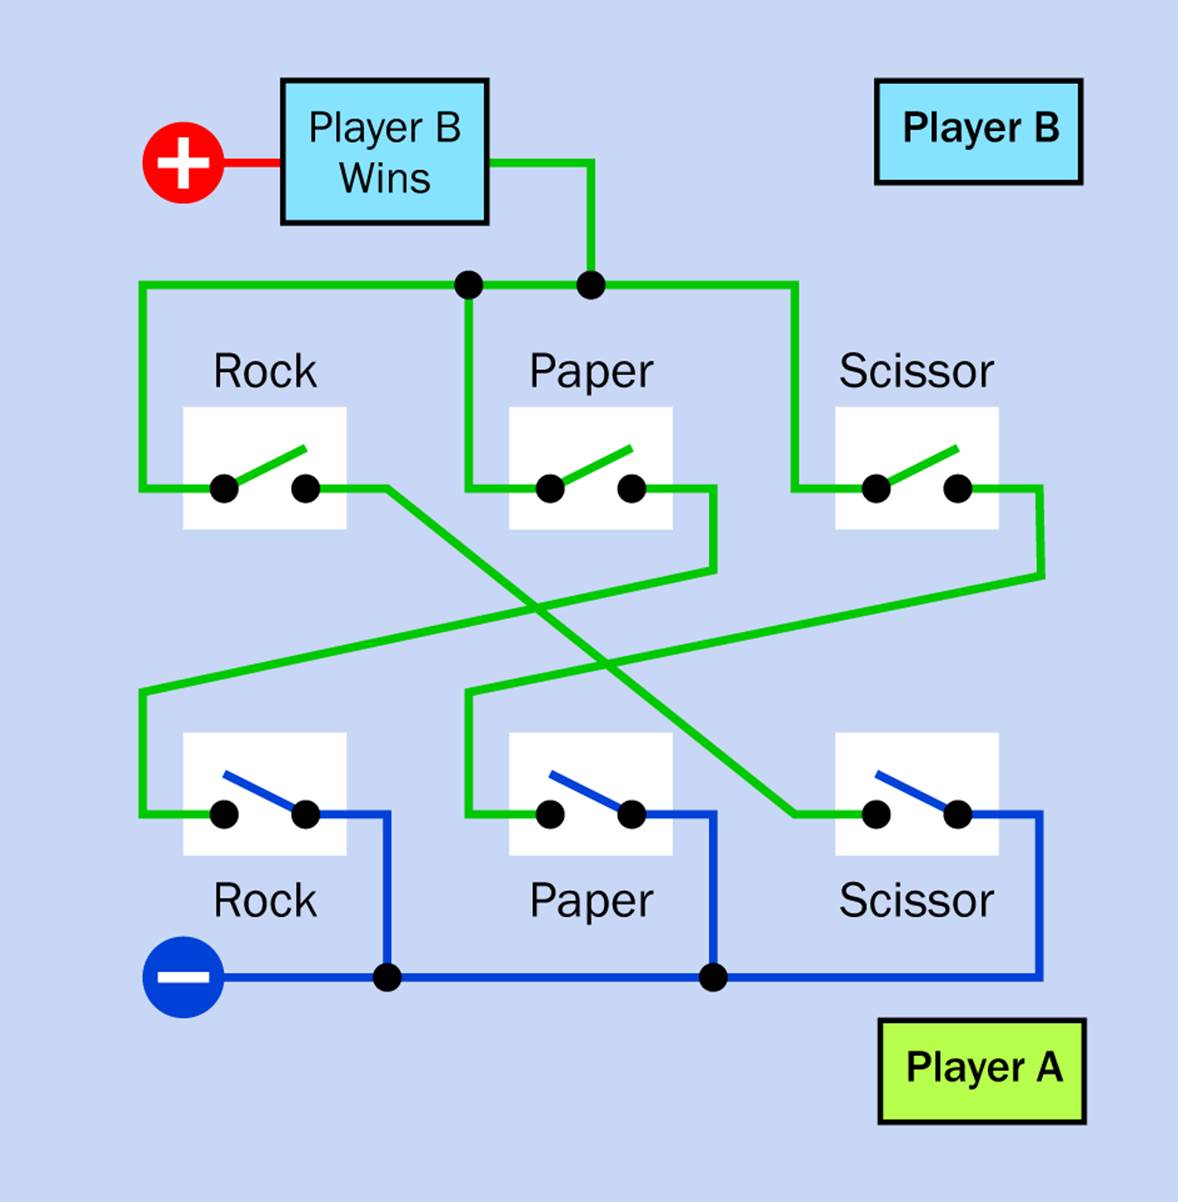 A switched circuit that produces a “Win” output for any of the combinations favoring Player B in a Rock, Paper, Scissors game.